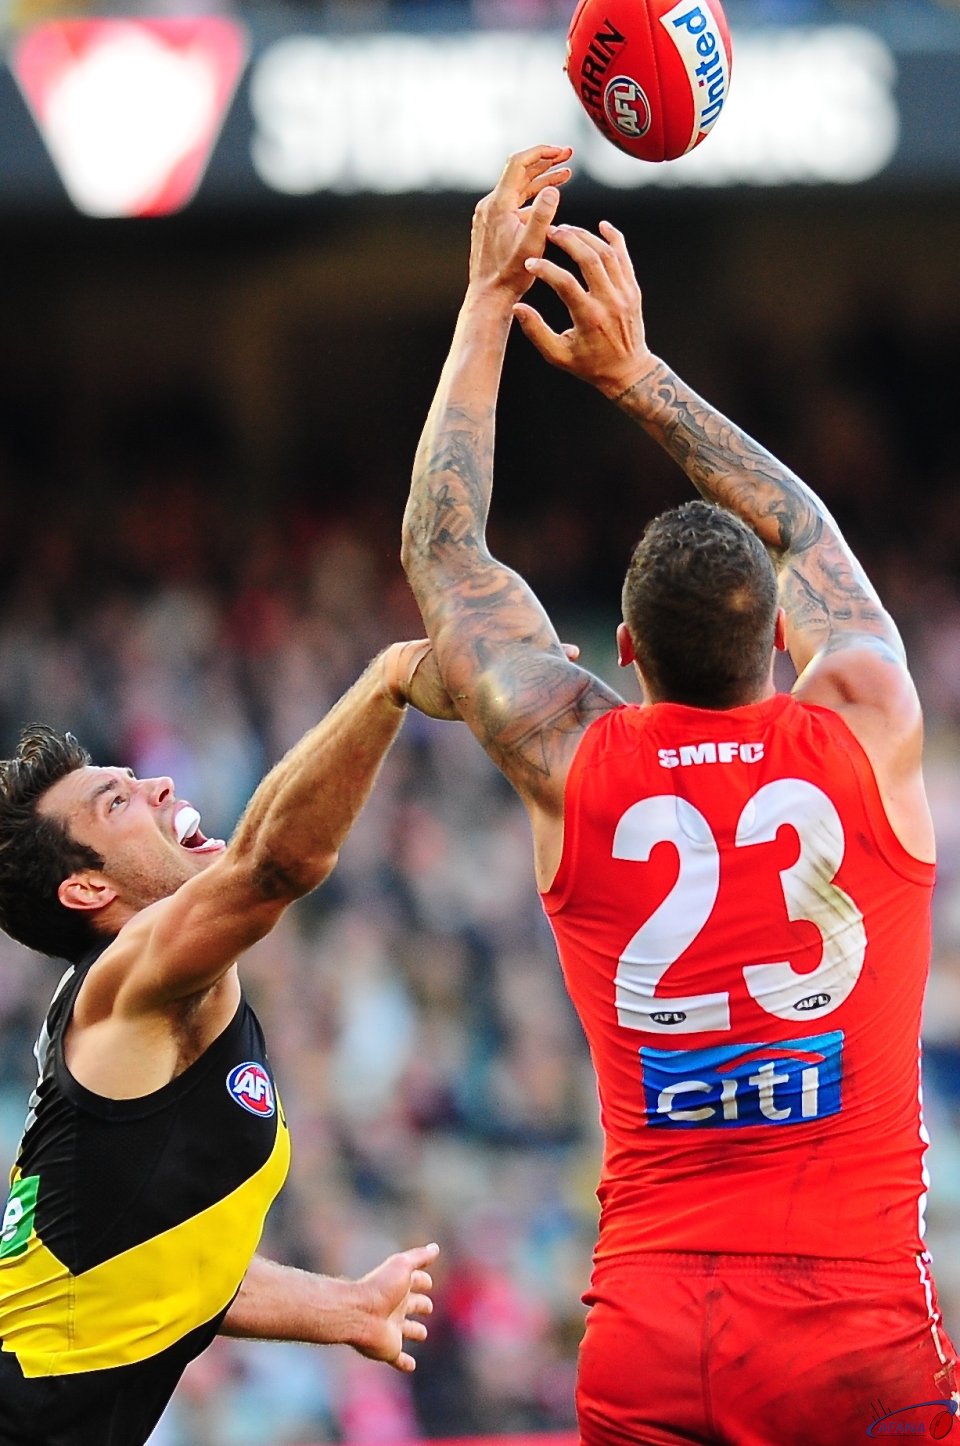 Buddy marks as Rance contests